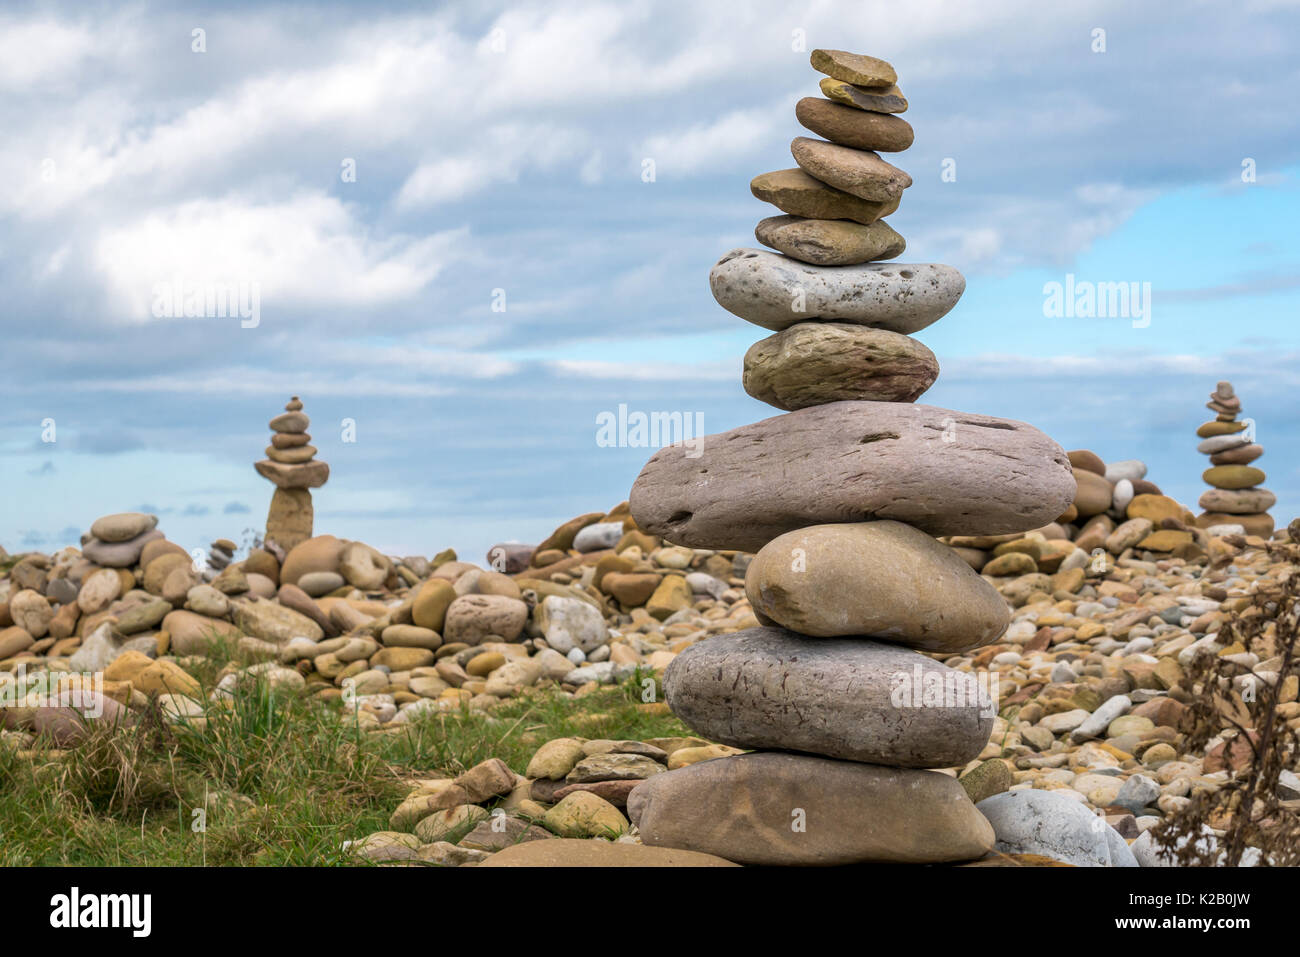 Stone balanced towers of pink and yellow stones, inukshuks or cairns, beach at Holy Island, Lindisfarne, Northumberland, England, UK Stock Photo